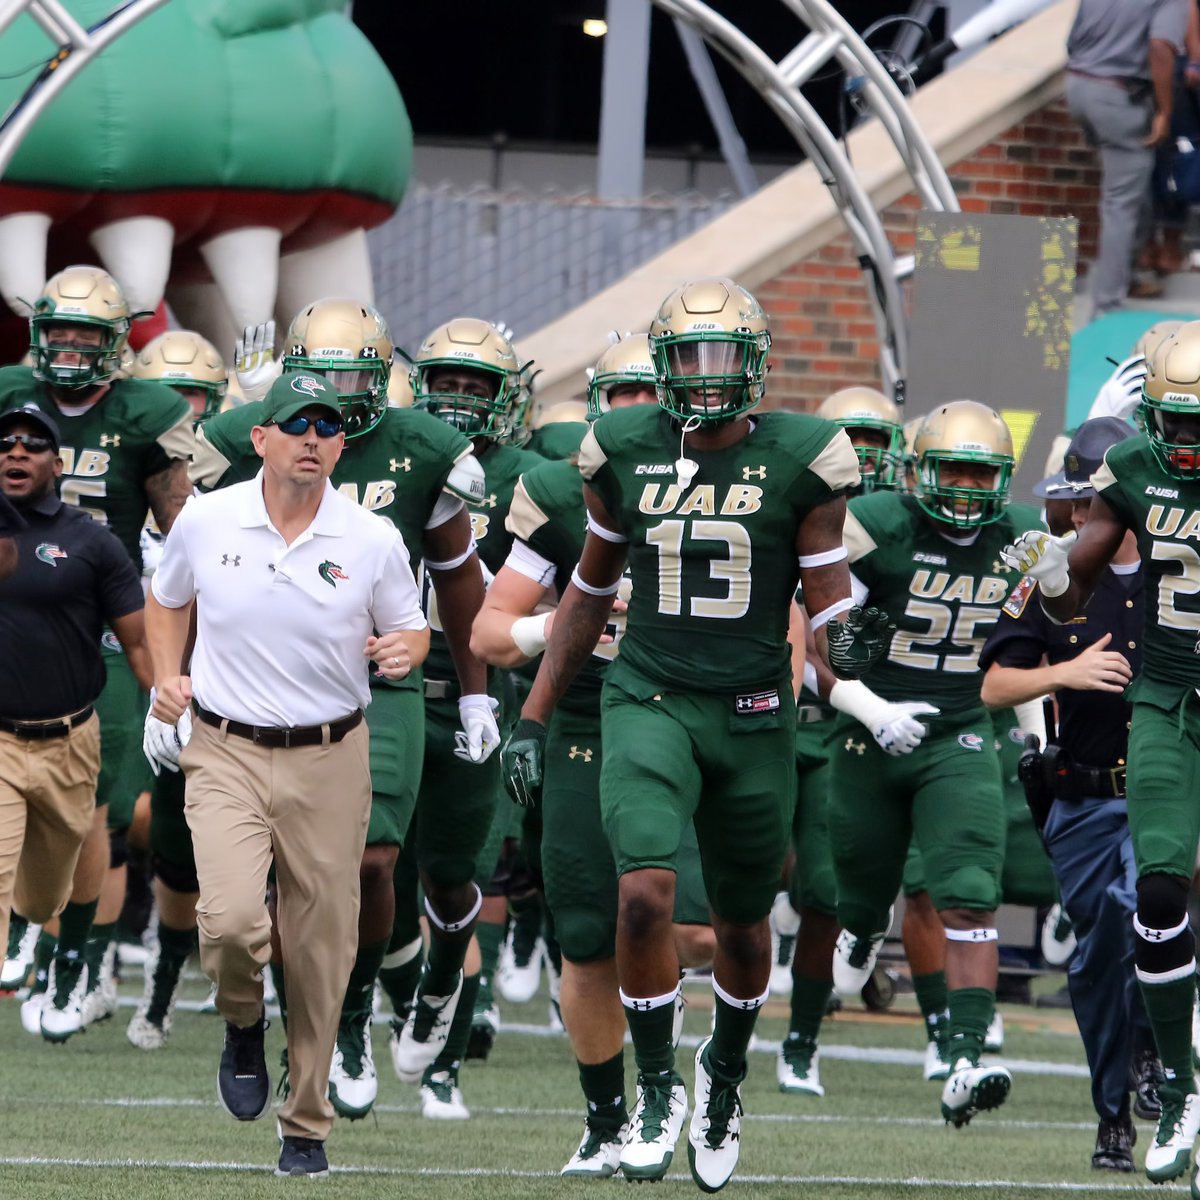 #AGTG After a great visit and conversation with @CoachM_Patrick I am blessed to have received an offer from @uab_fb @DilfersDimes @CoachKThompson @si_one11 @On3Recruits @MohrRecruiting @BHoward_11 #3 #uabfootball #uab #uabblazers #CTFosterII13 #ChaseFosterII13 #ImBuiltD1ff3rent